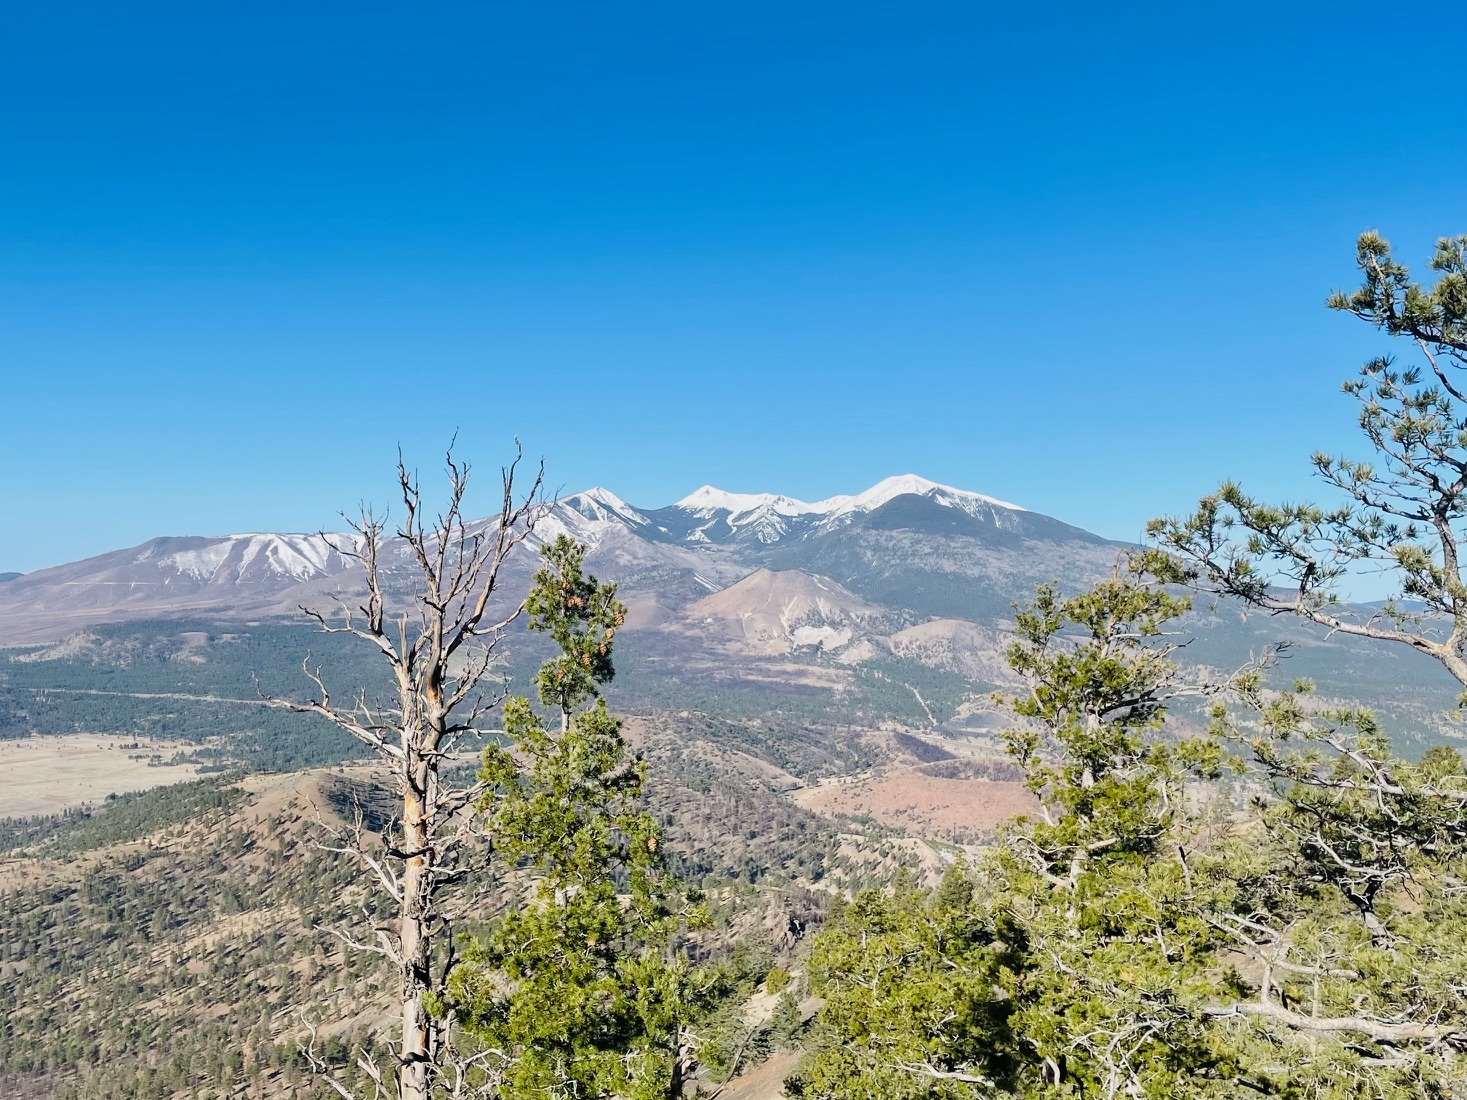 Trail Review: O’Leary Peak Outlook Trail